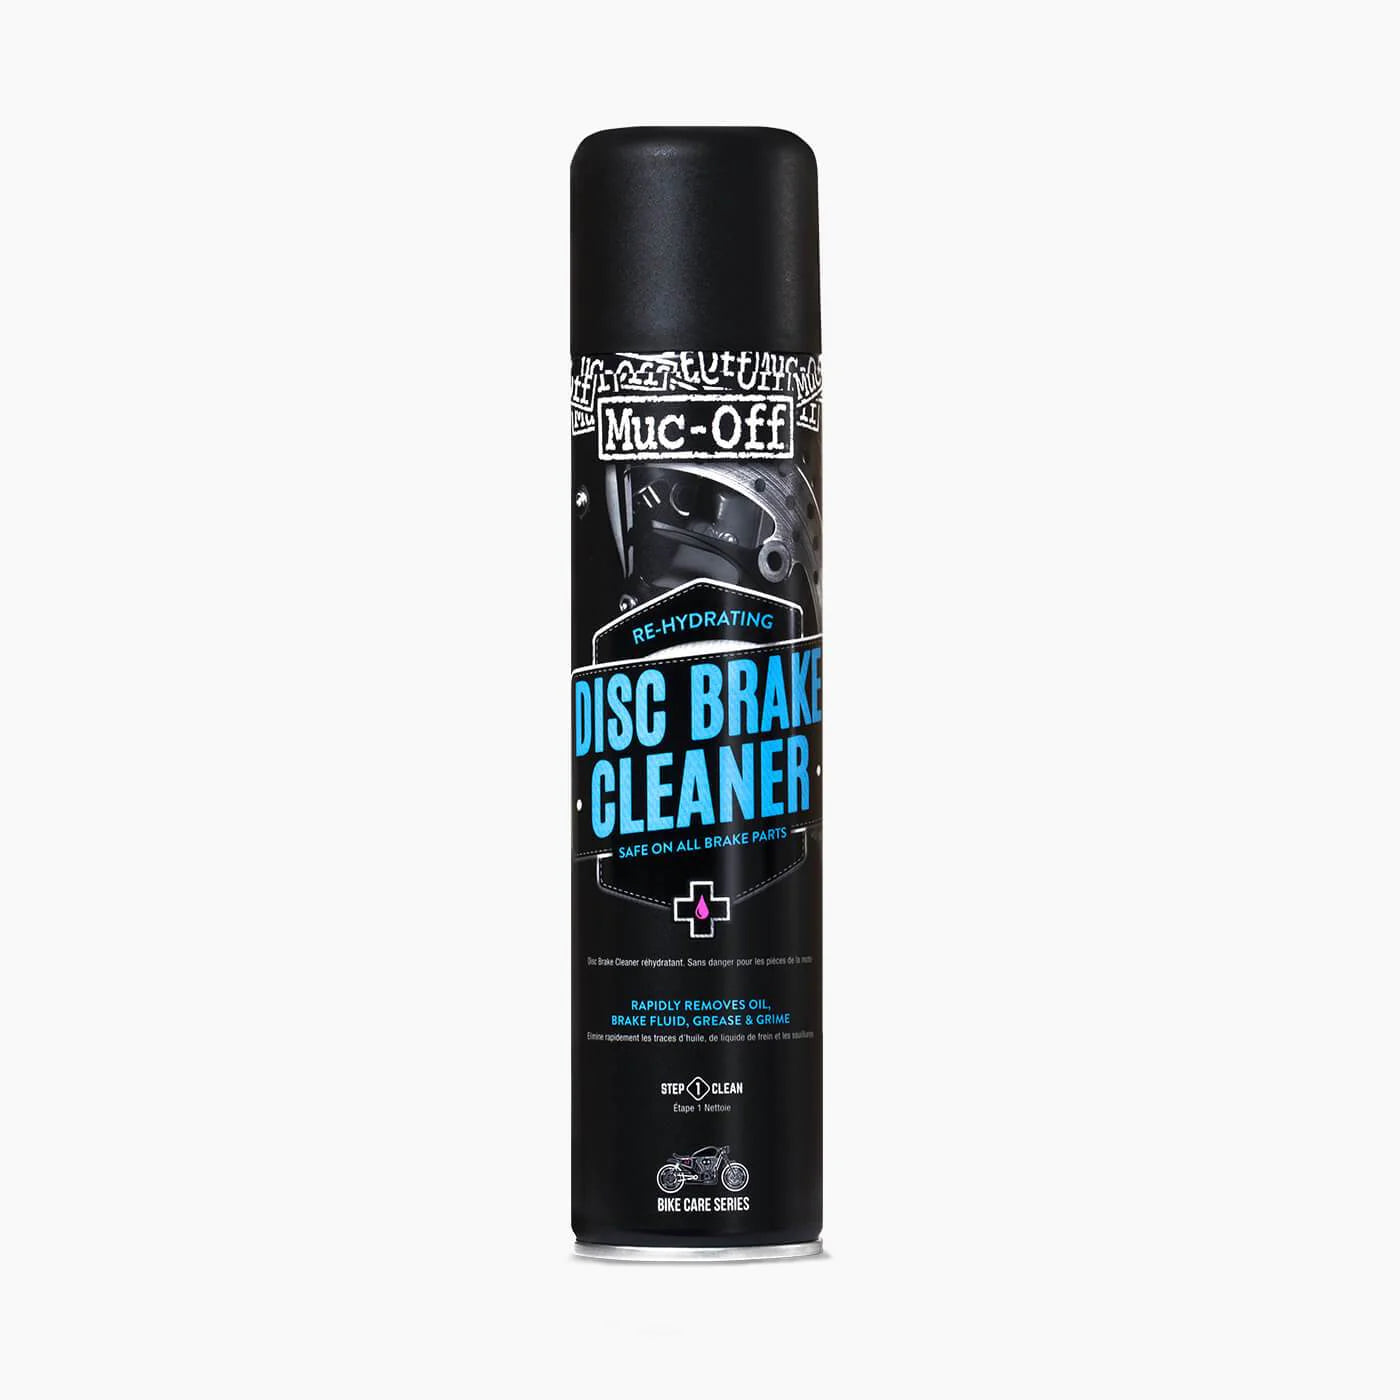 Muc-off Motorcycle Disc Brake Cleaner 440ml canister with nozzle for precise application